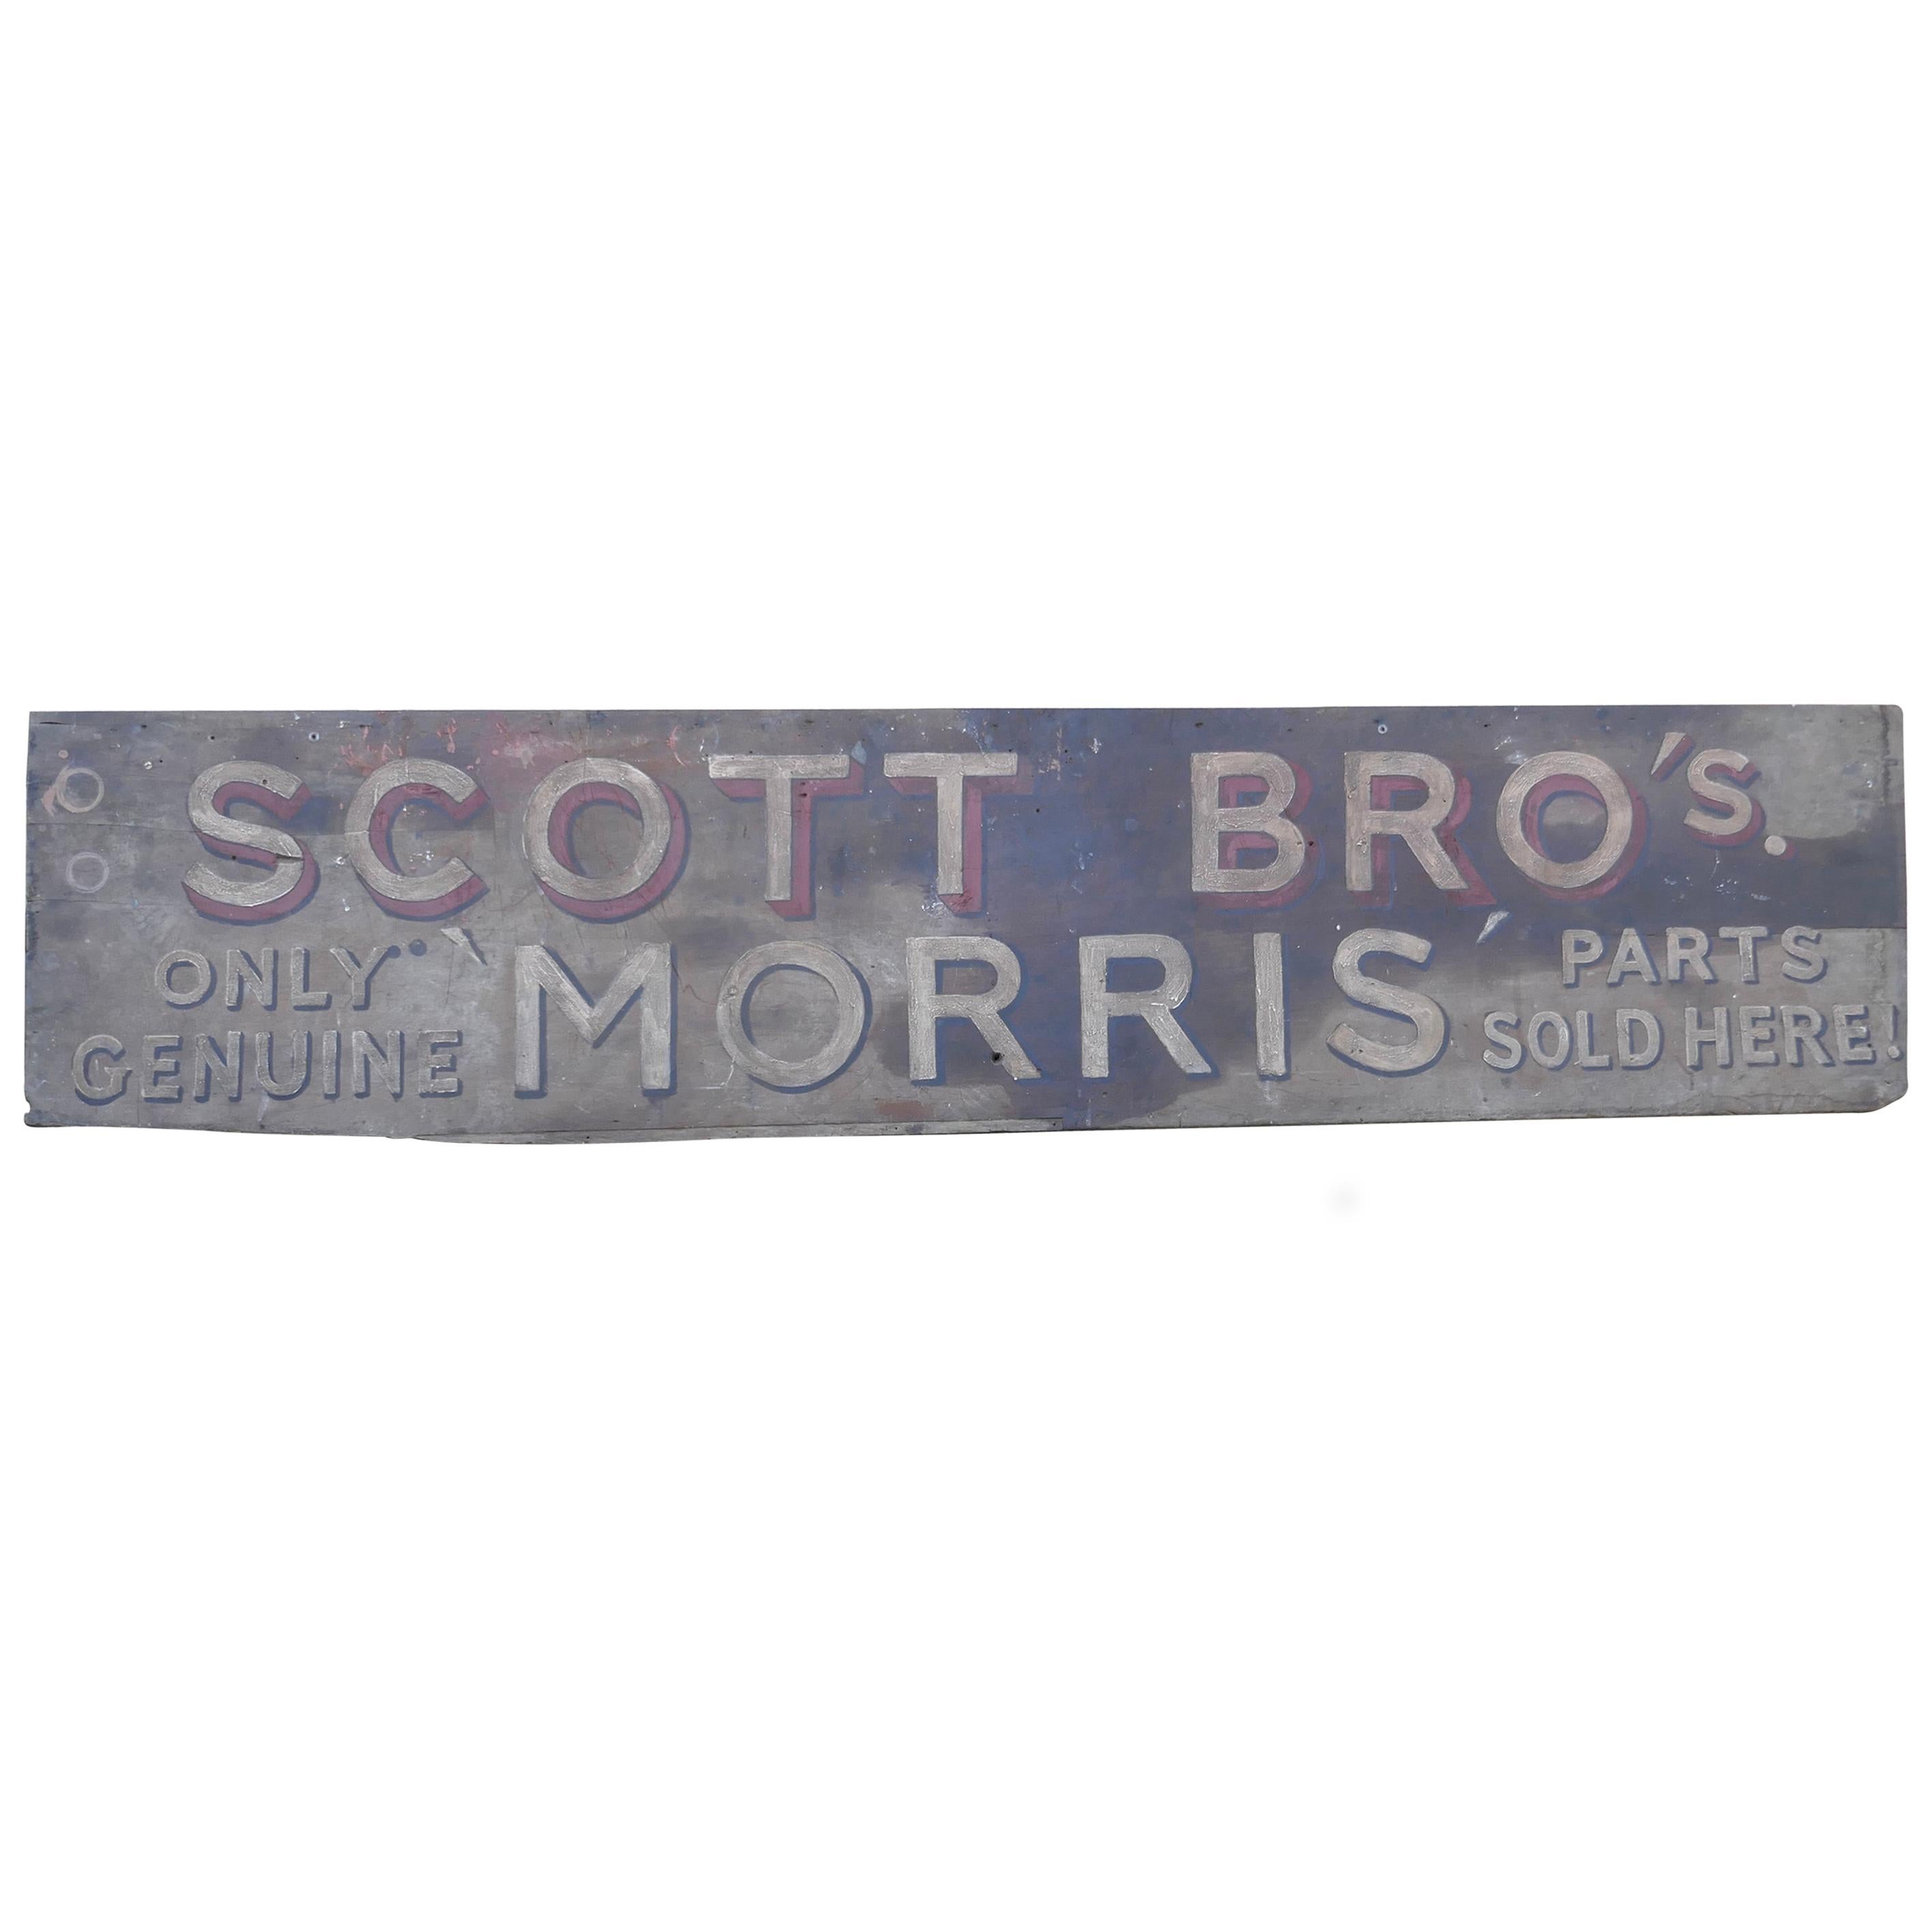 Large Painted Wooden Automobile Advertising Sign, “Scott Bro’s Morris”